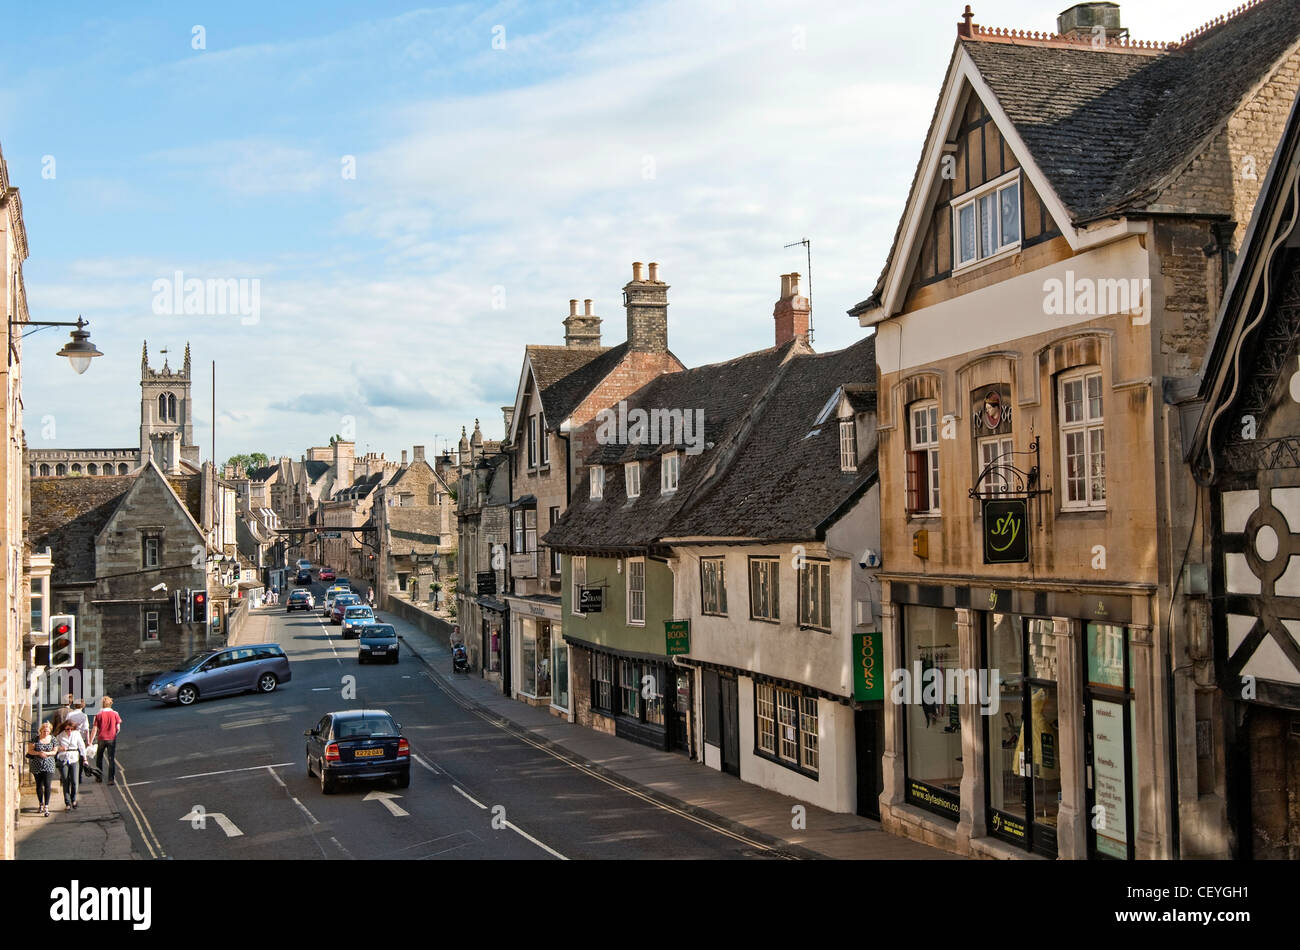 Stamford is an ancient town located approximately 100 miles to the north of London, at the old Great North Road leading to York. Stock Photo